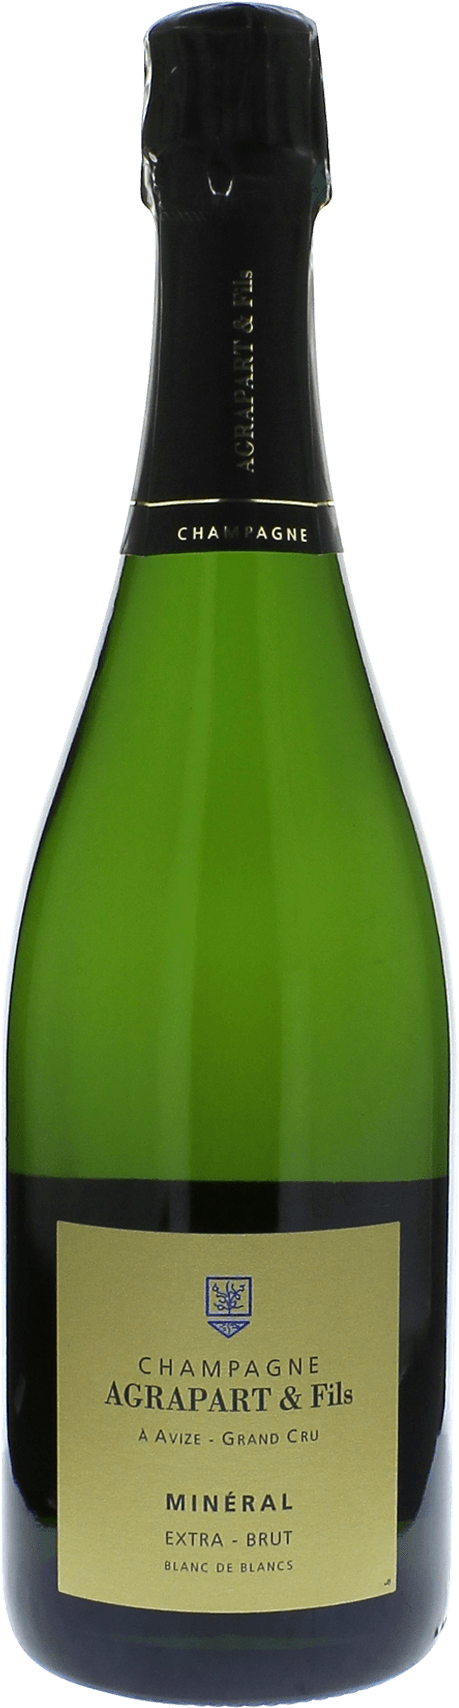 Agrapart  mineral extra brut blanc de blancs grand cru 2011  Agrapart & Fils, Champagne